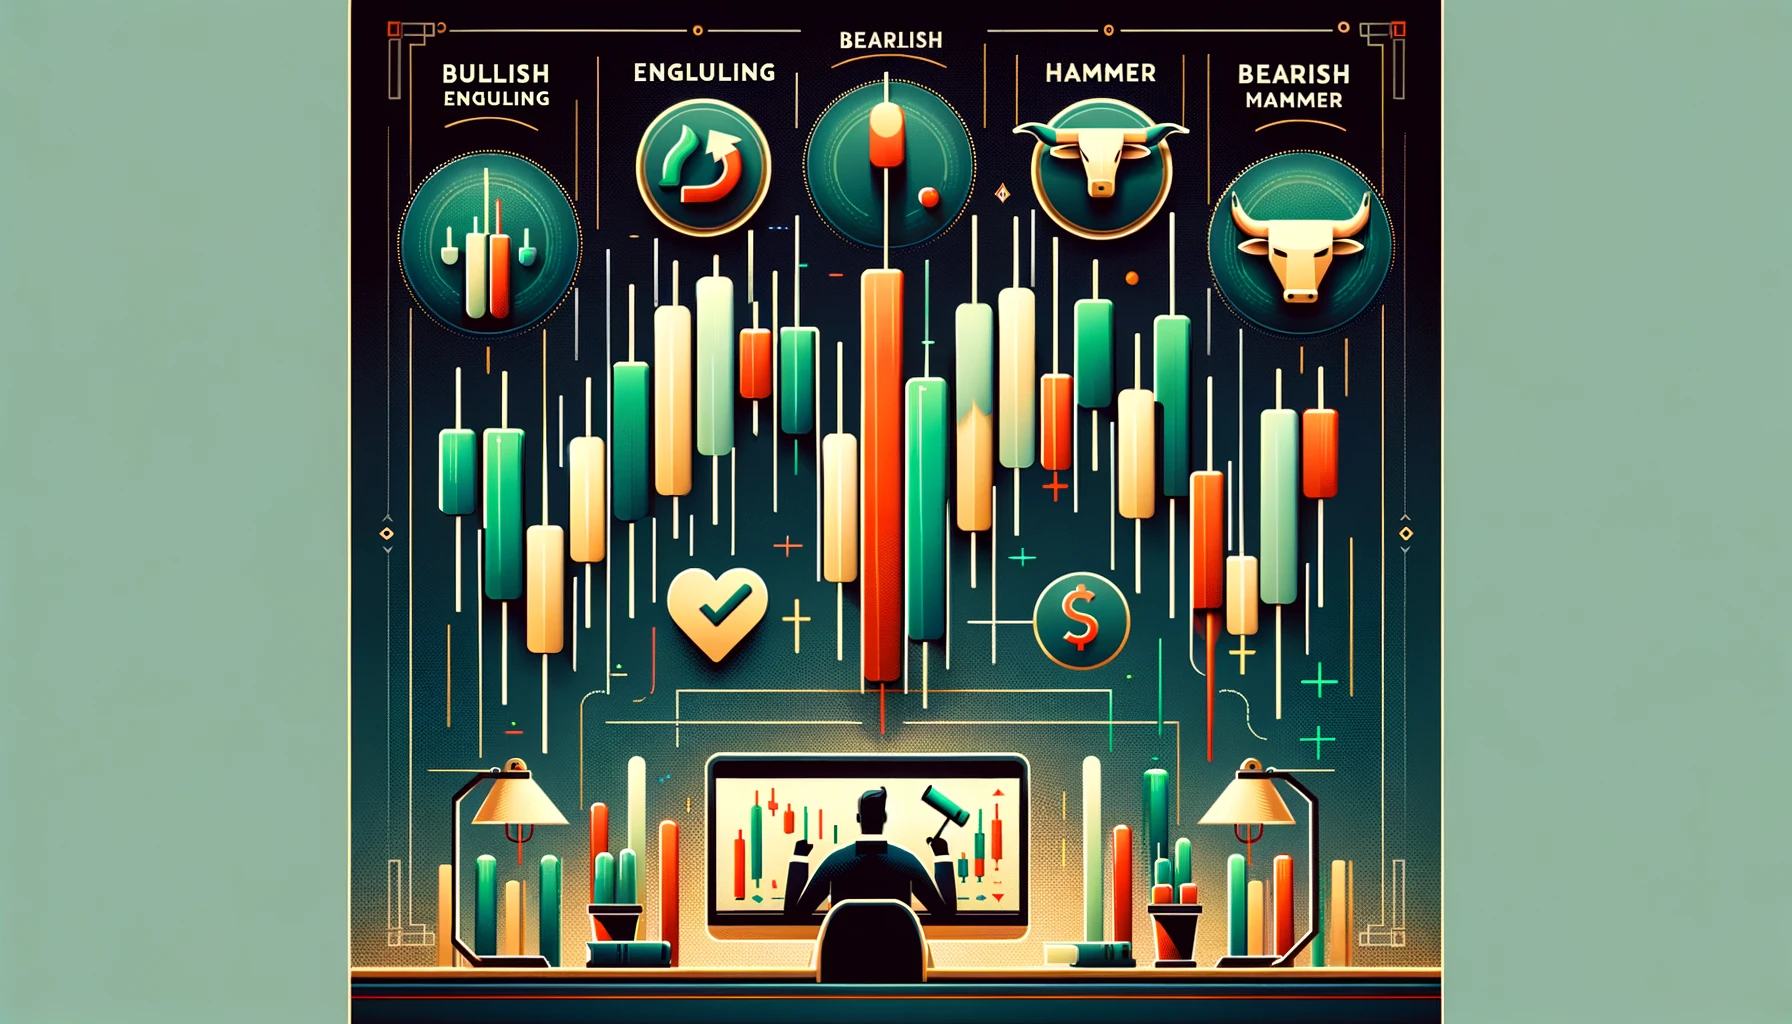 Throughout this guide, we've explored the rich history of candlestick charting, from its origins in Japan to its widespread adoption in today's global trading environments. We've decoded key candlestick patterns, discussed how to read these charts effectively, and provided practical strategies for applying this knowledge in real trading scenarios. Additionally, we've highlighted common pitfalls and how to avoid them, ensuring traders can use these tools wisely.